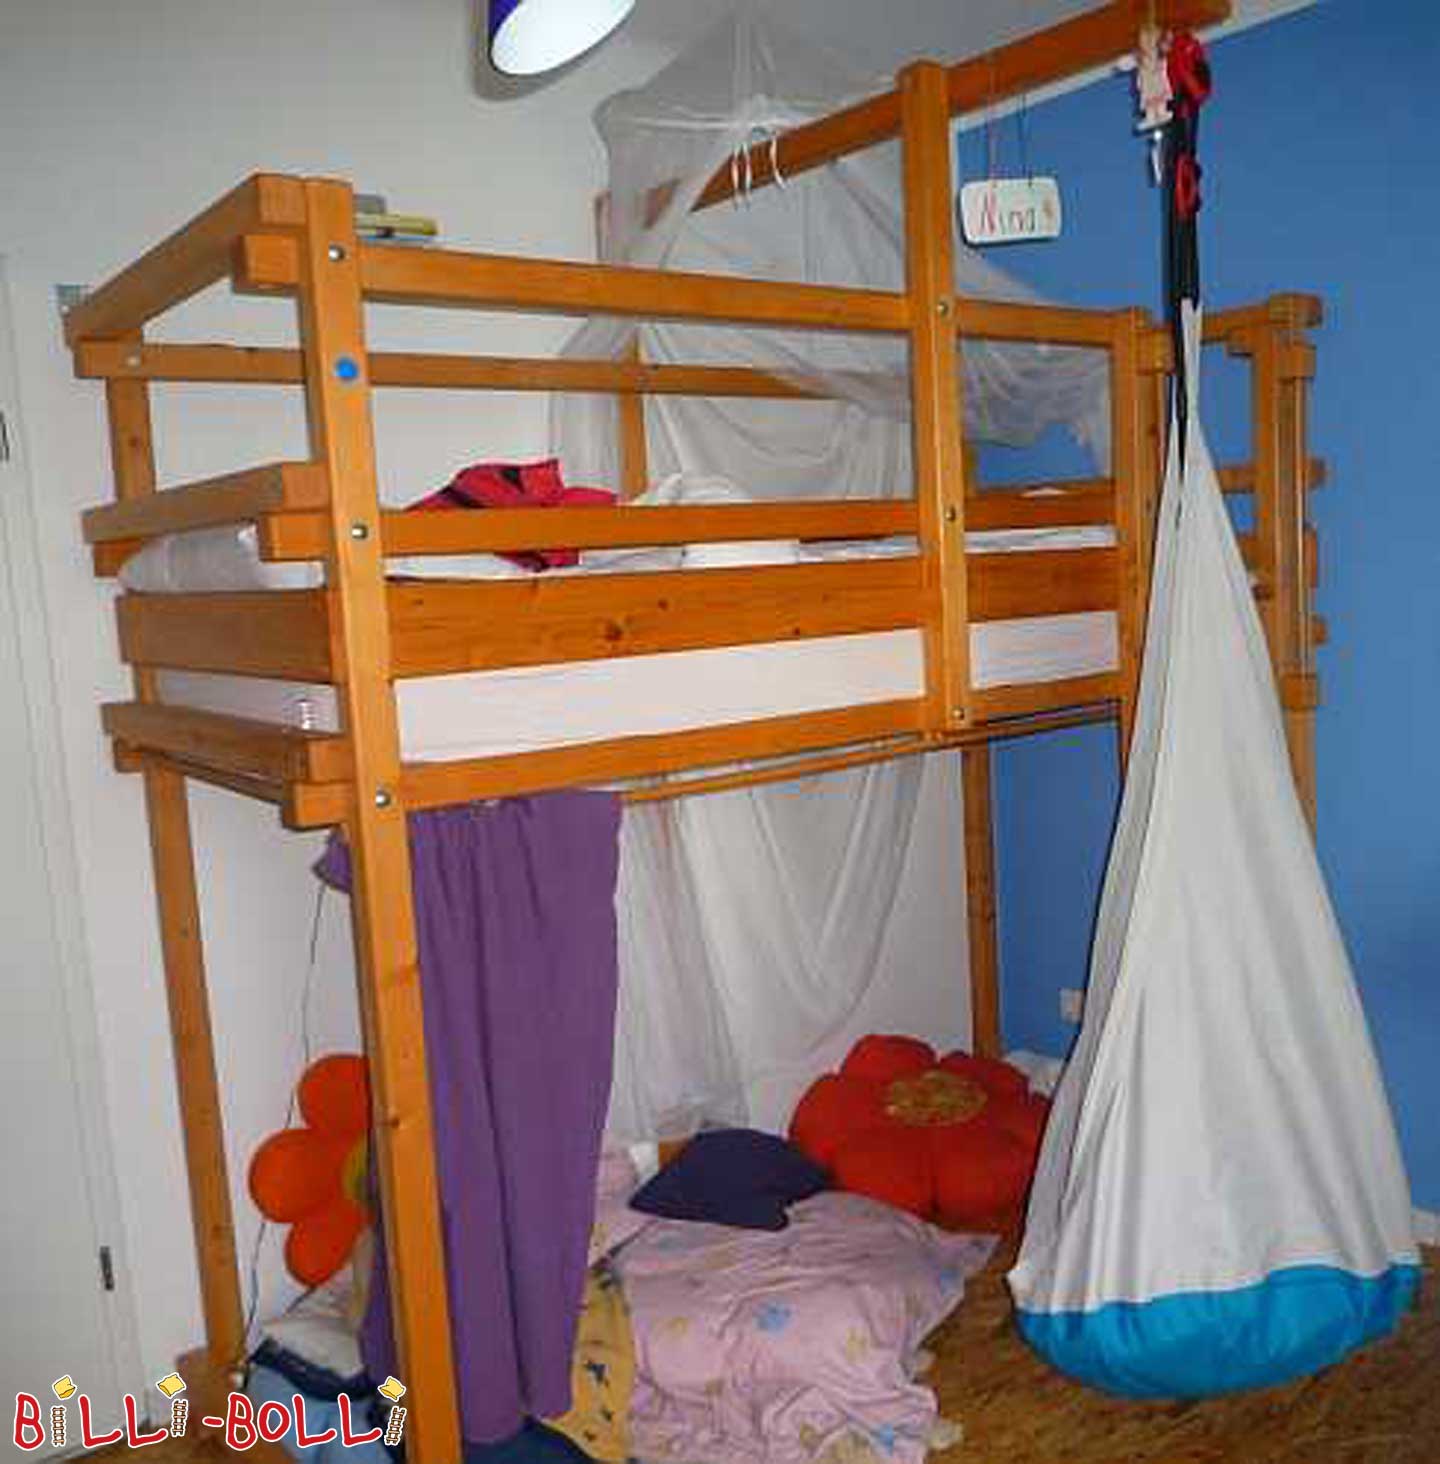 Pirate loft bed ladder outside (Category: second hand loft bed)